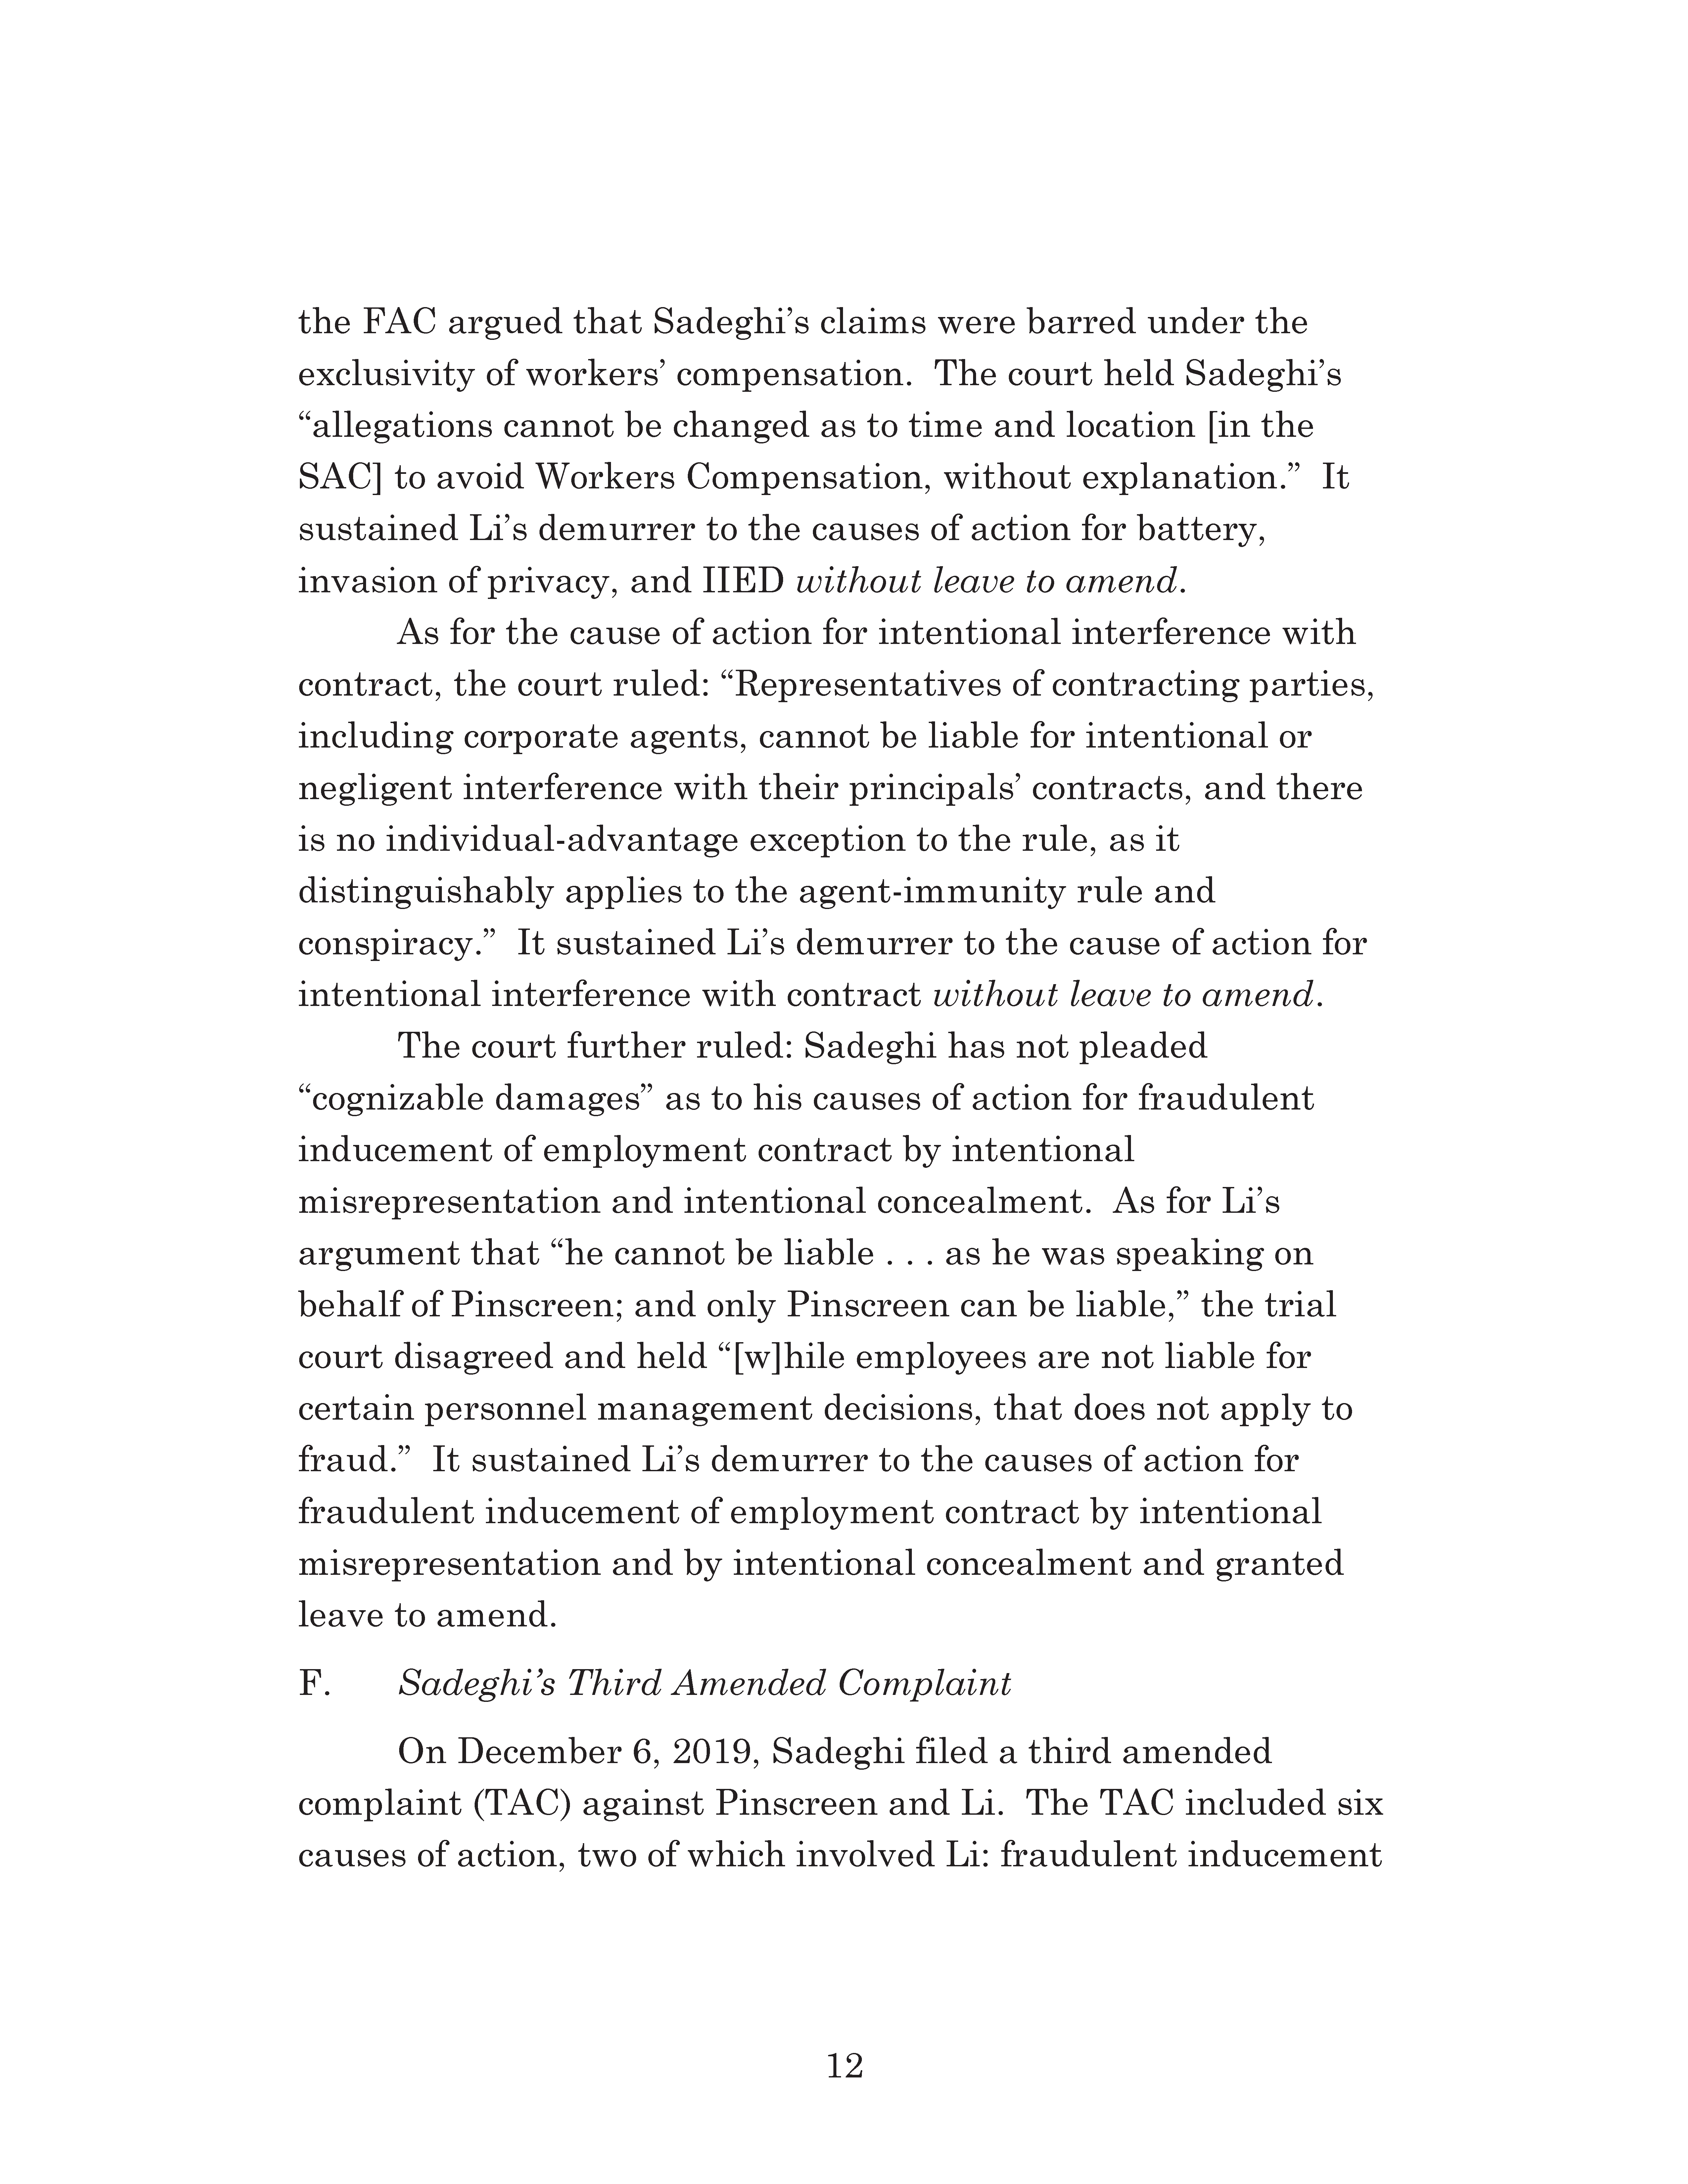 Appellate Court's Opinion Upholding Sadeghi's Claims for Fraud, Battery and IIED Against Li Page 12